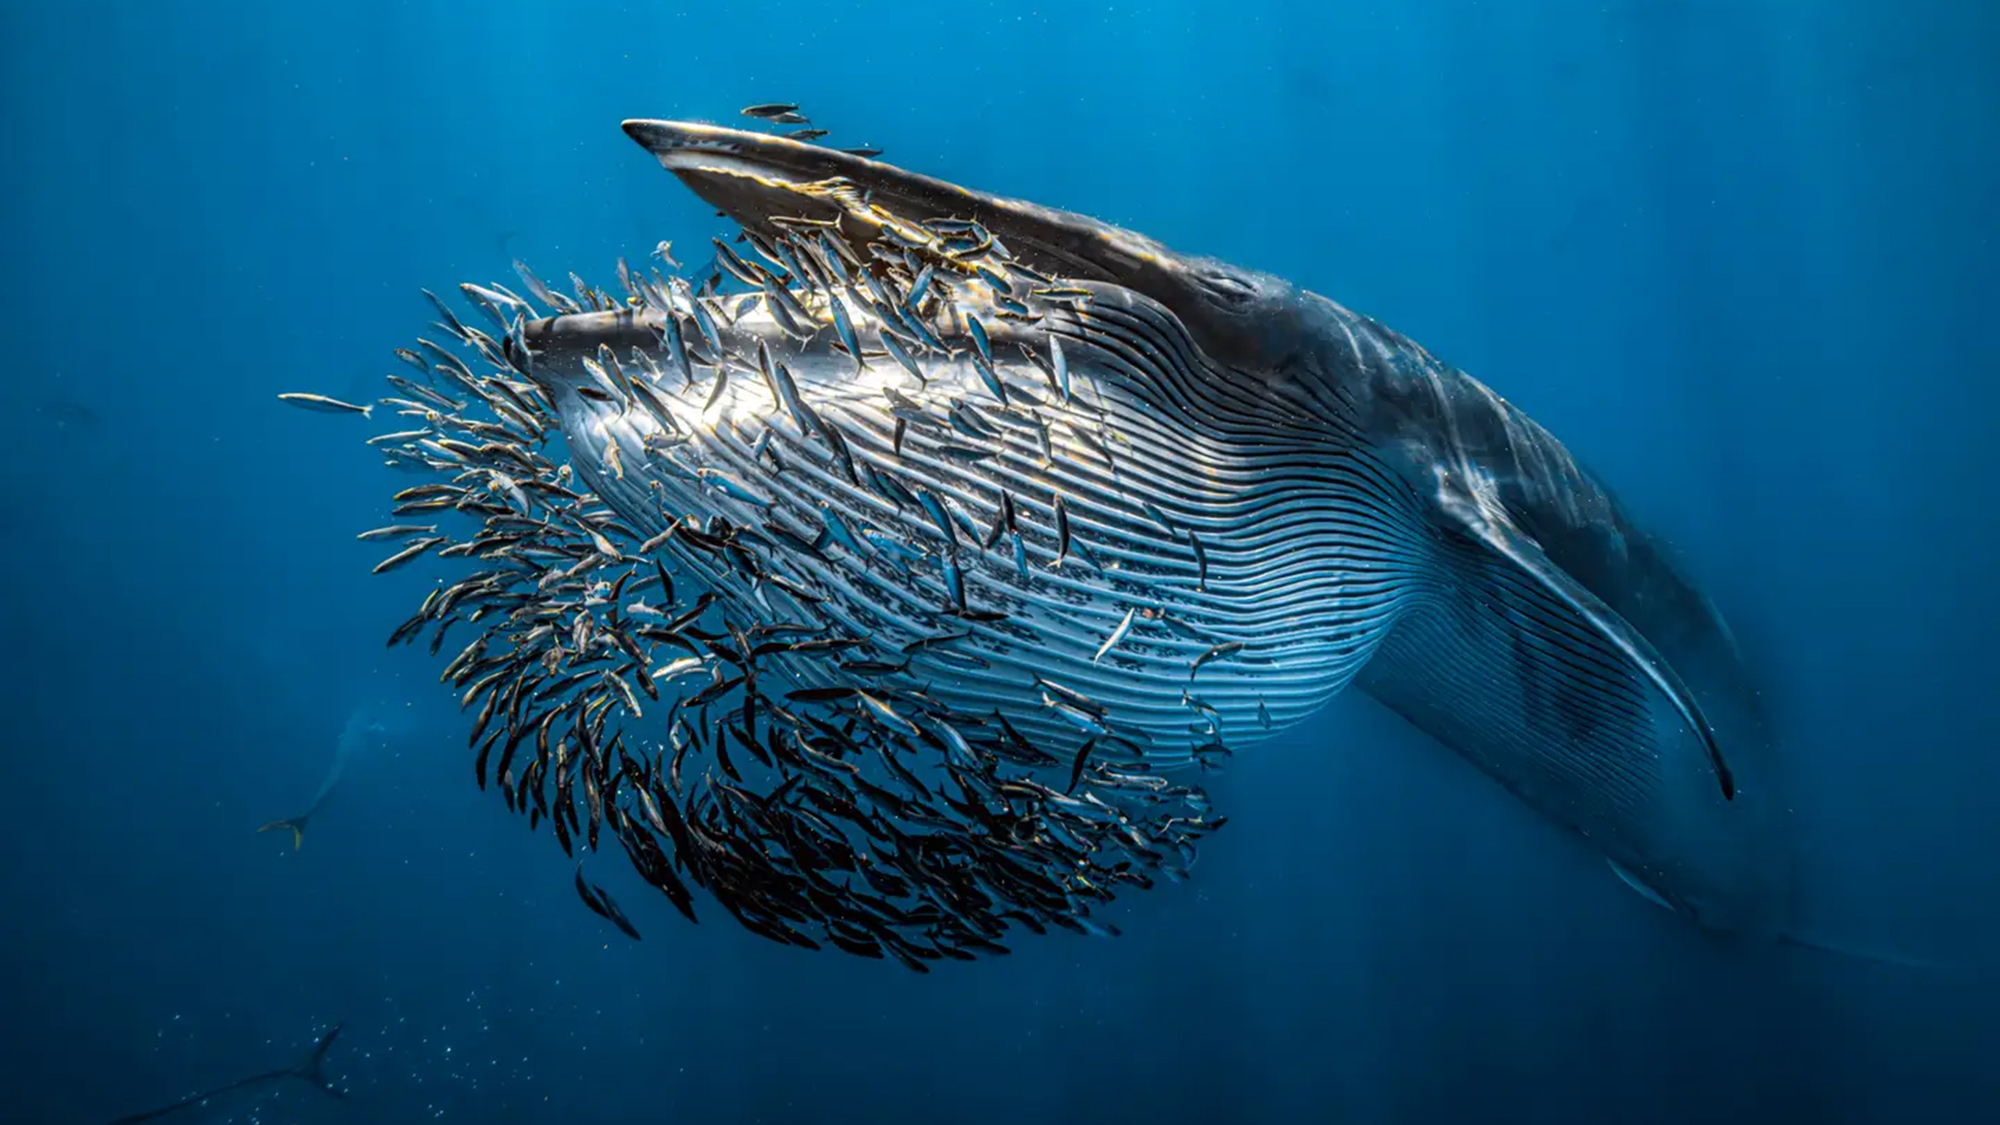 11 remarkable images from the Underwater Photographer of the Year